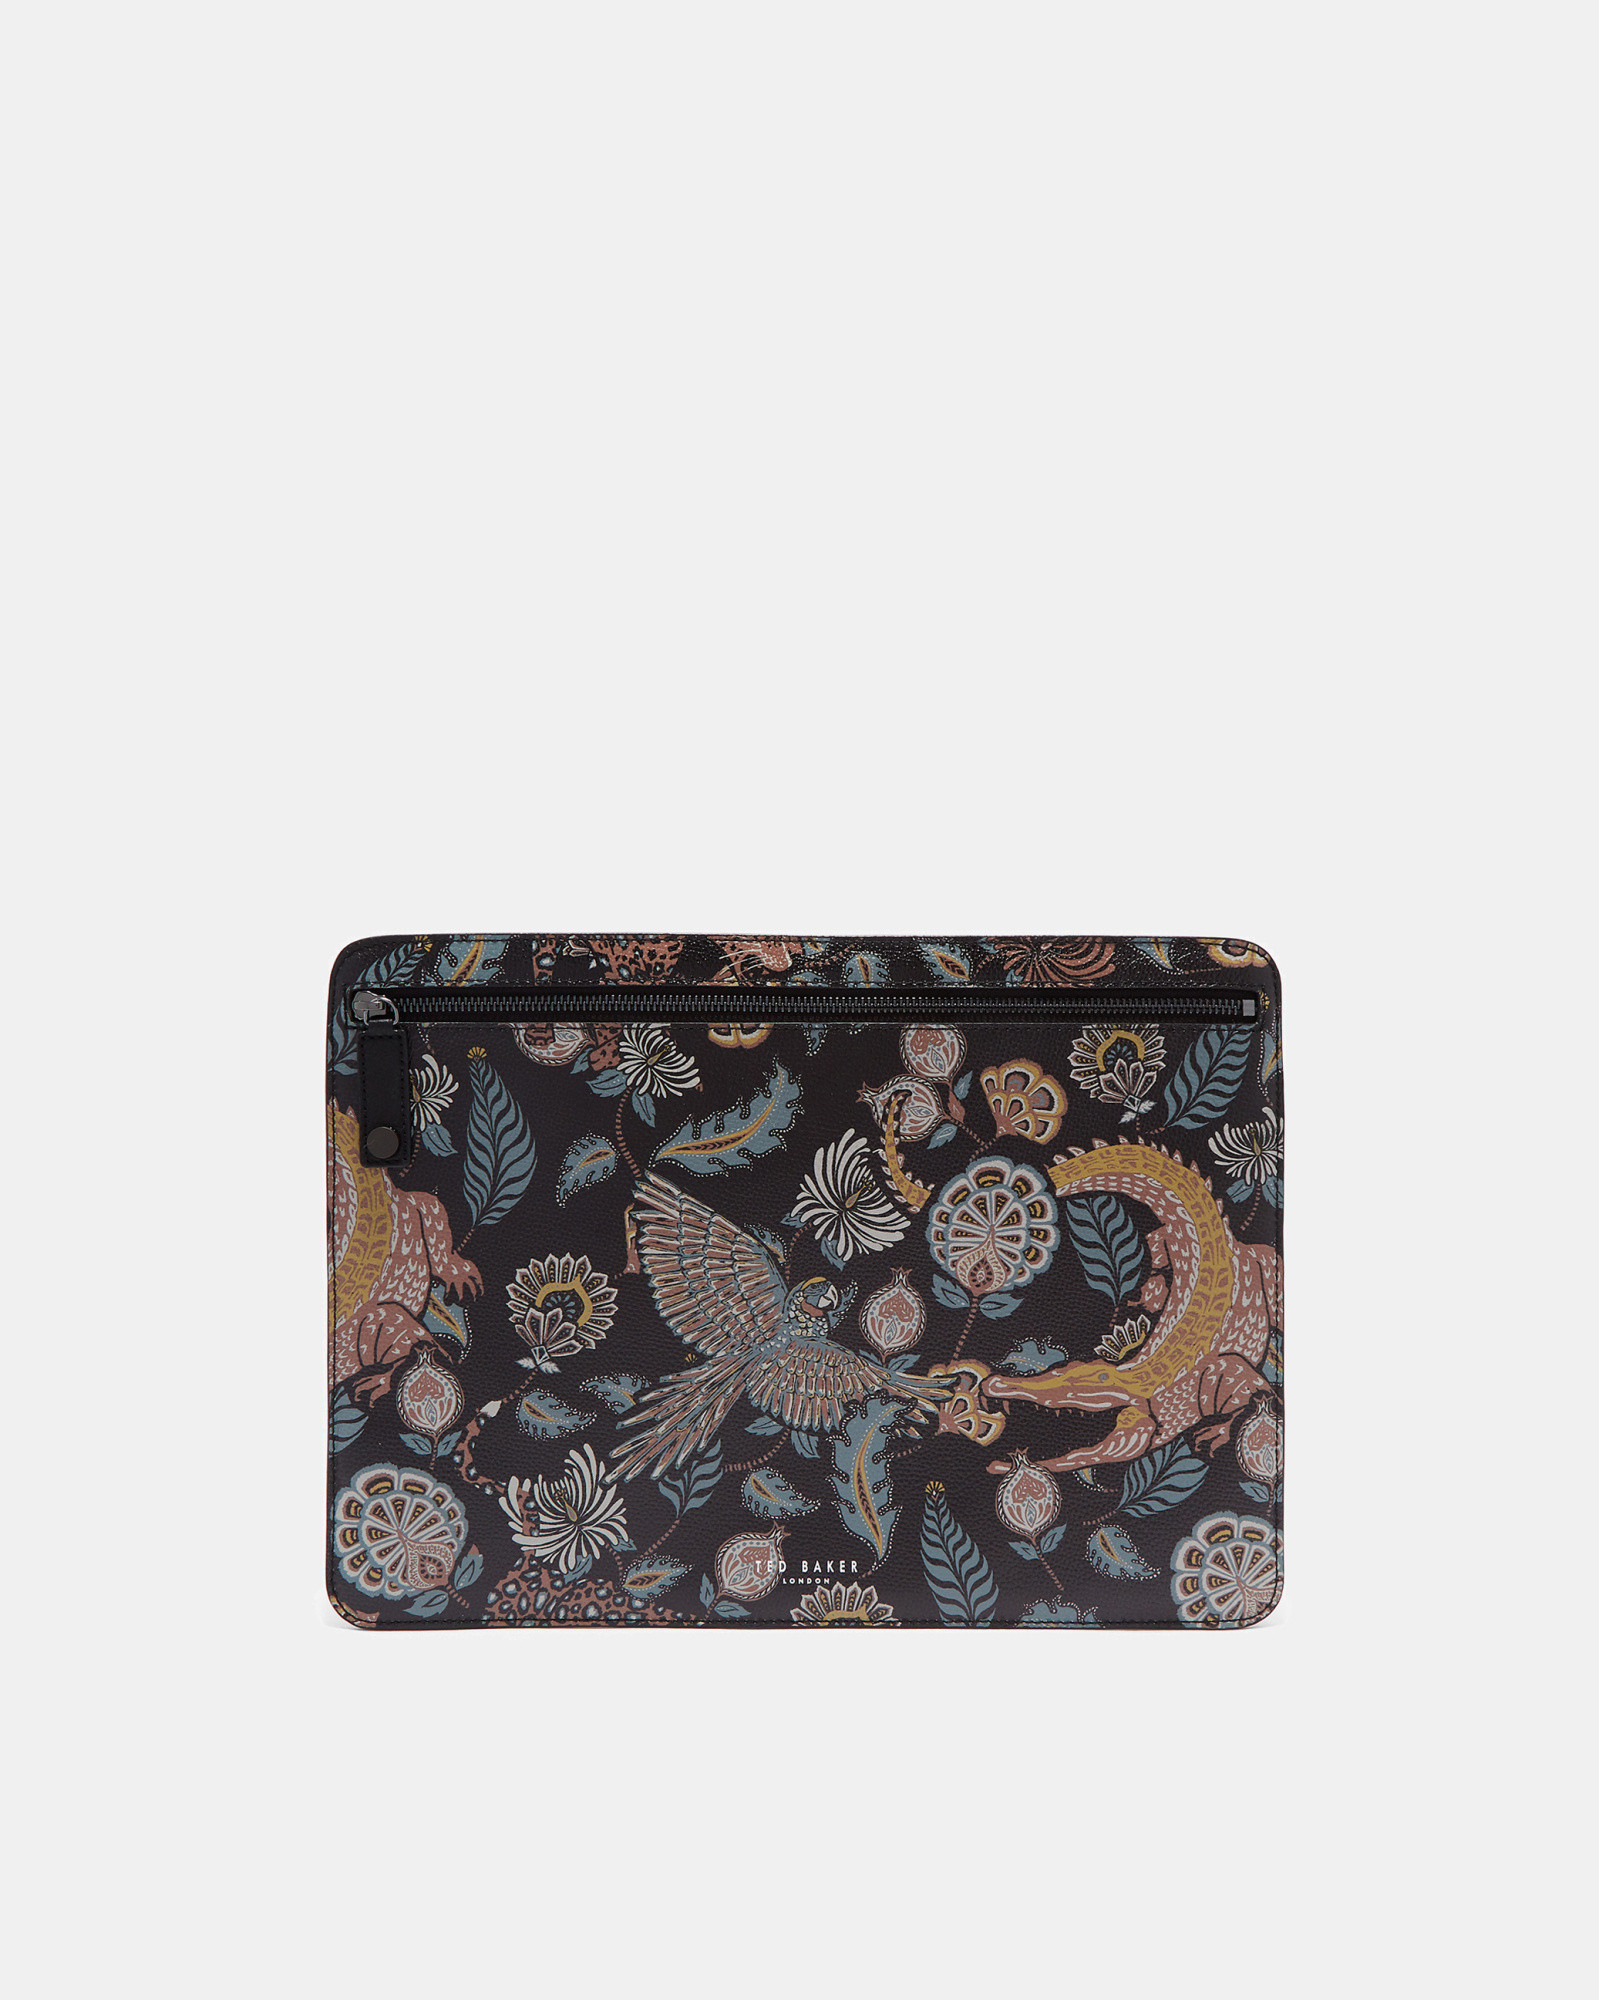 TIGGS Printed leather document bag